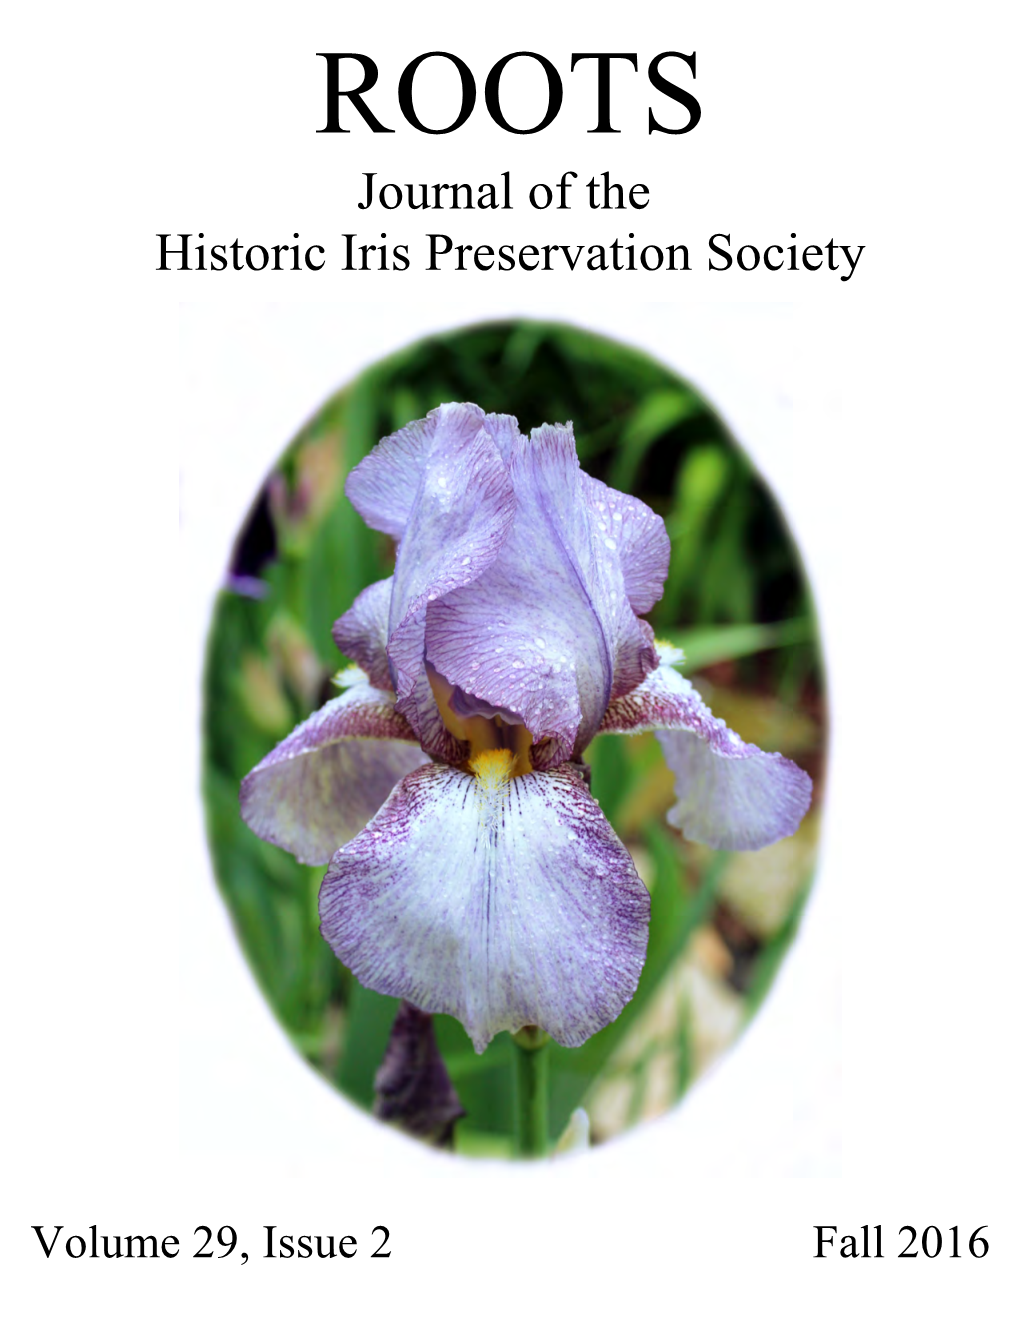 Journal of the Historic Iris Preservation Society